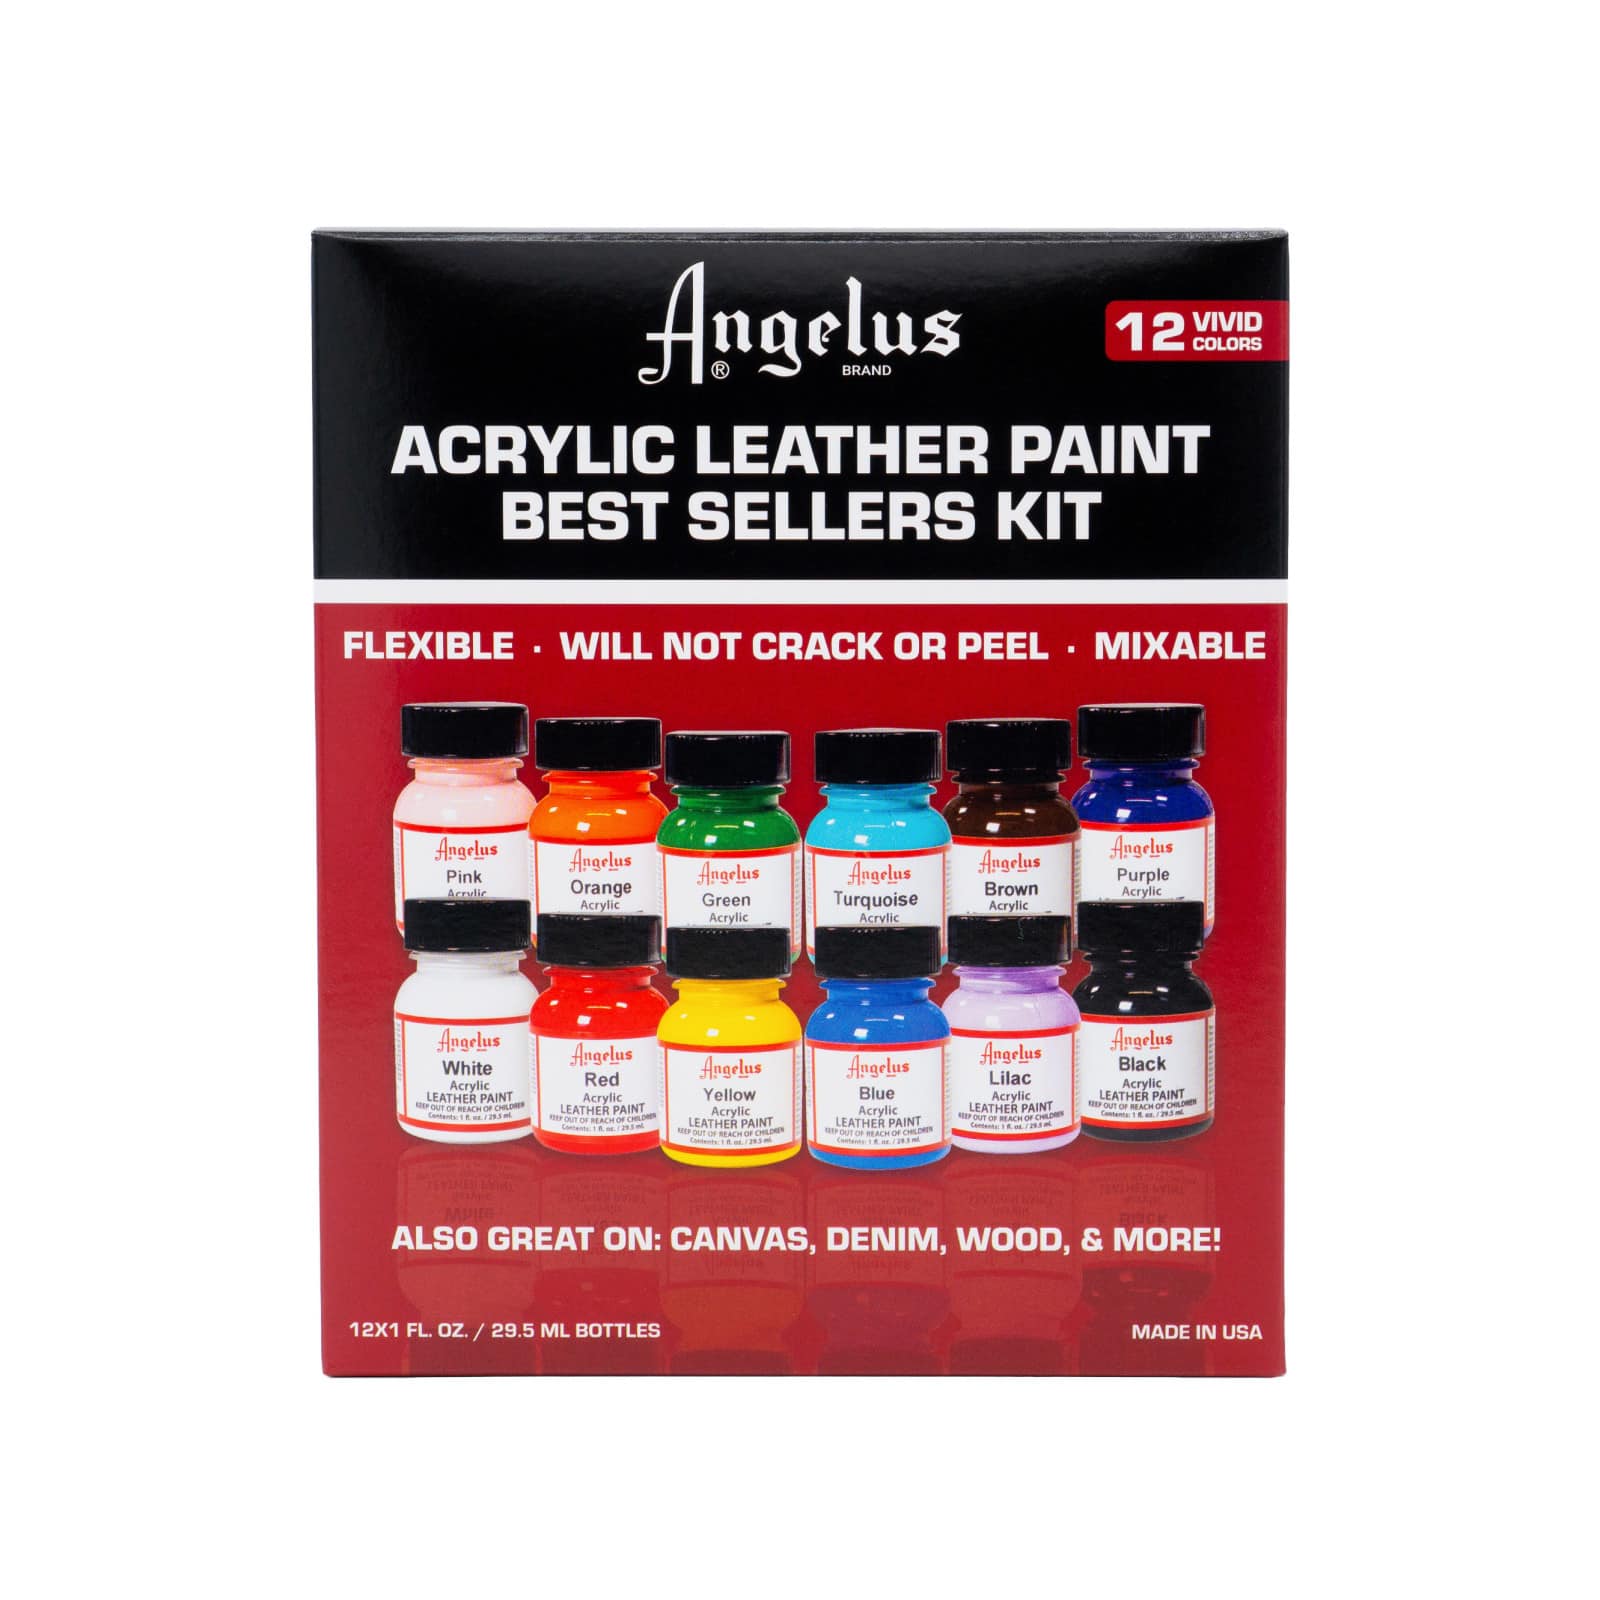 ANGELUS Professional Leather Preparer and Delgazer, Hobbies & Toys